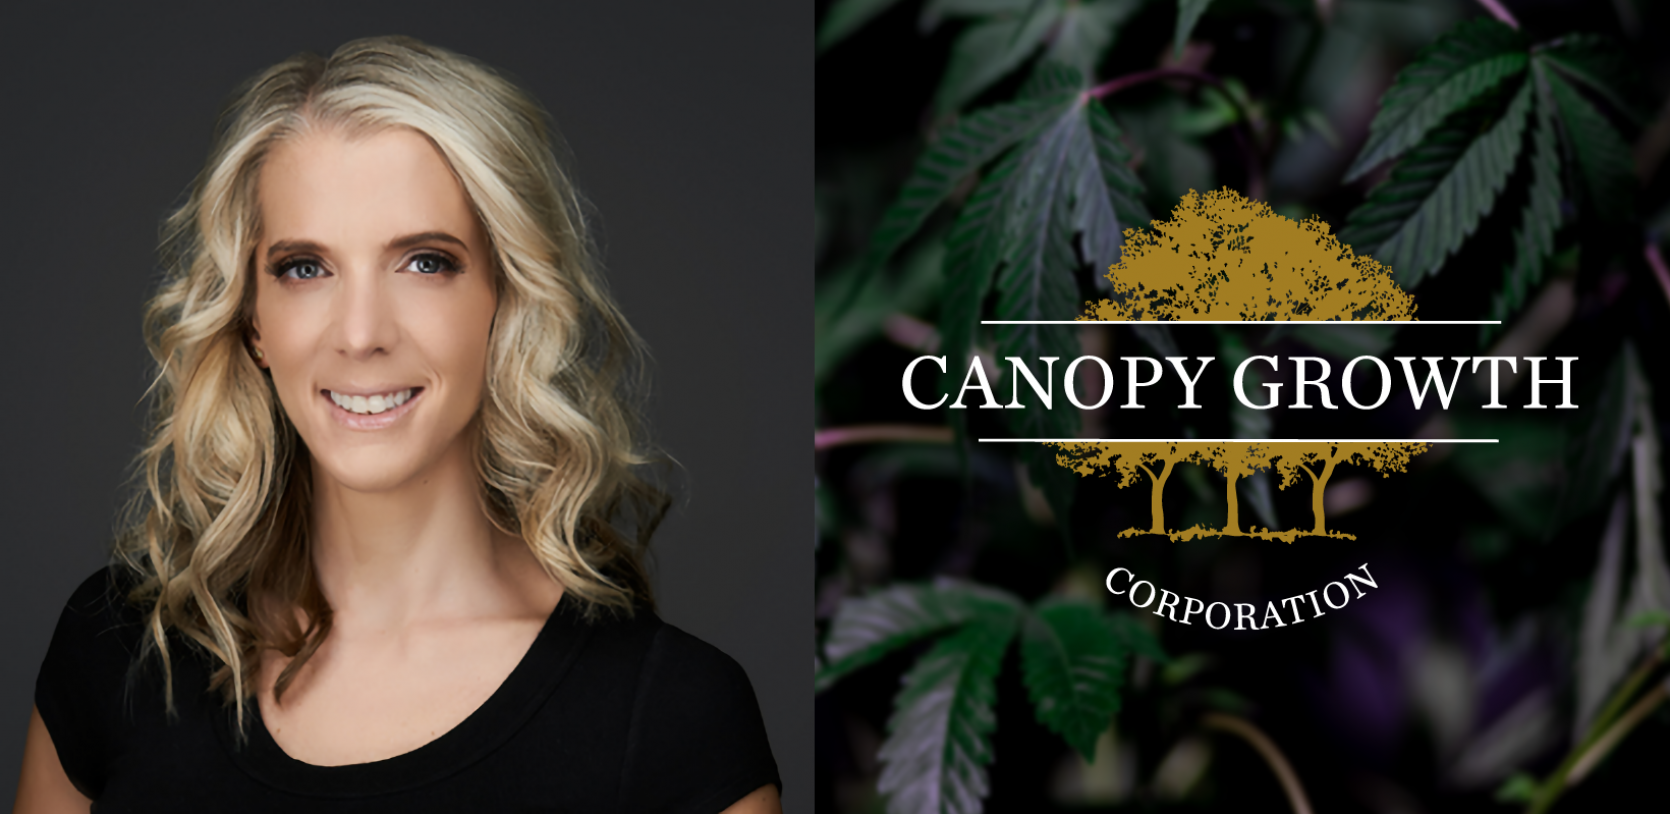 Photo for: Tara Rozalowsky from Canopy Growth to speak at 2022 Cannabis Drinks Expo